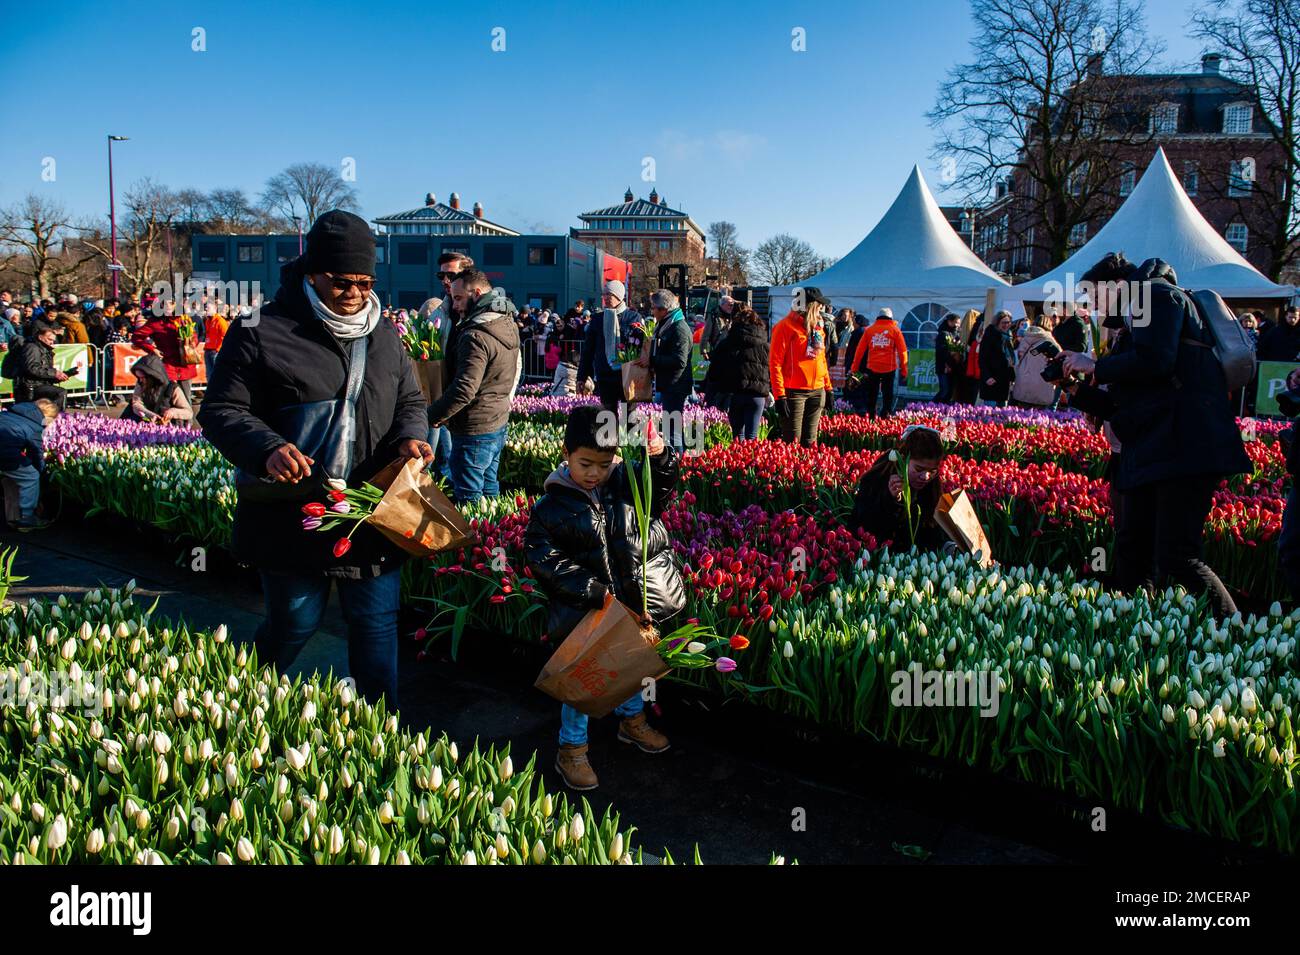 A father and his son are seen walking with paper bags full of tulips. Each year on the 3rd Saturday of January, the National Tulip Day is celebrated in Amsterdam. Dutch tulip growers built a huge picking garden with more than 200,000 colorful tulips at the Museumplein in Amsterdam. Visitors are allowed to pick tulips for free. The event was opened by Olympic skating champion, Irene Schouten. Prior to the opening, she christened a new tulip: Tulipa 'Dutch Pearl' as a reference to the world - famous painting 'The girl with a pearl earring' by Johannes Vermeer. Stock Photo